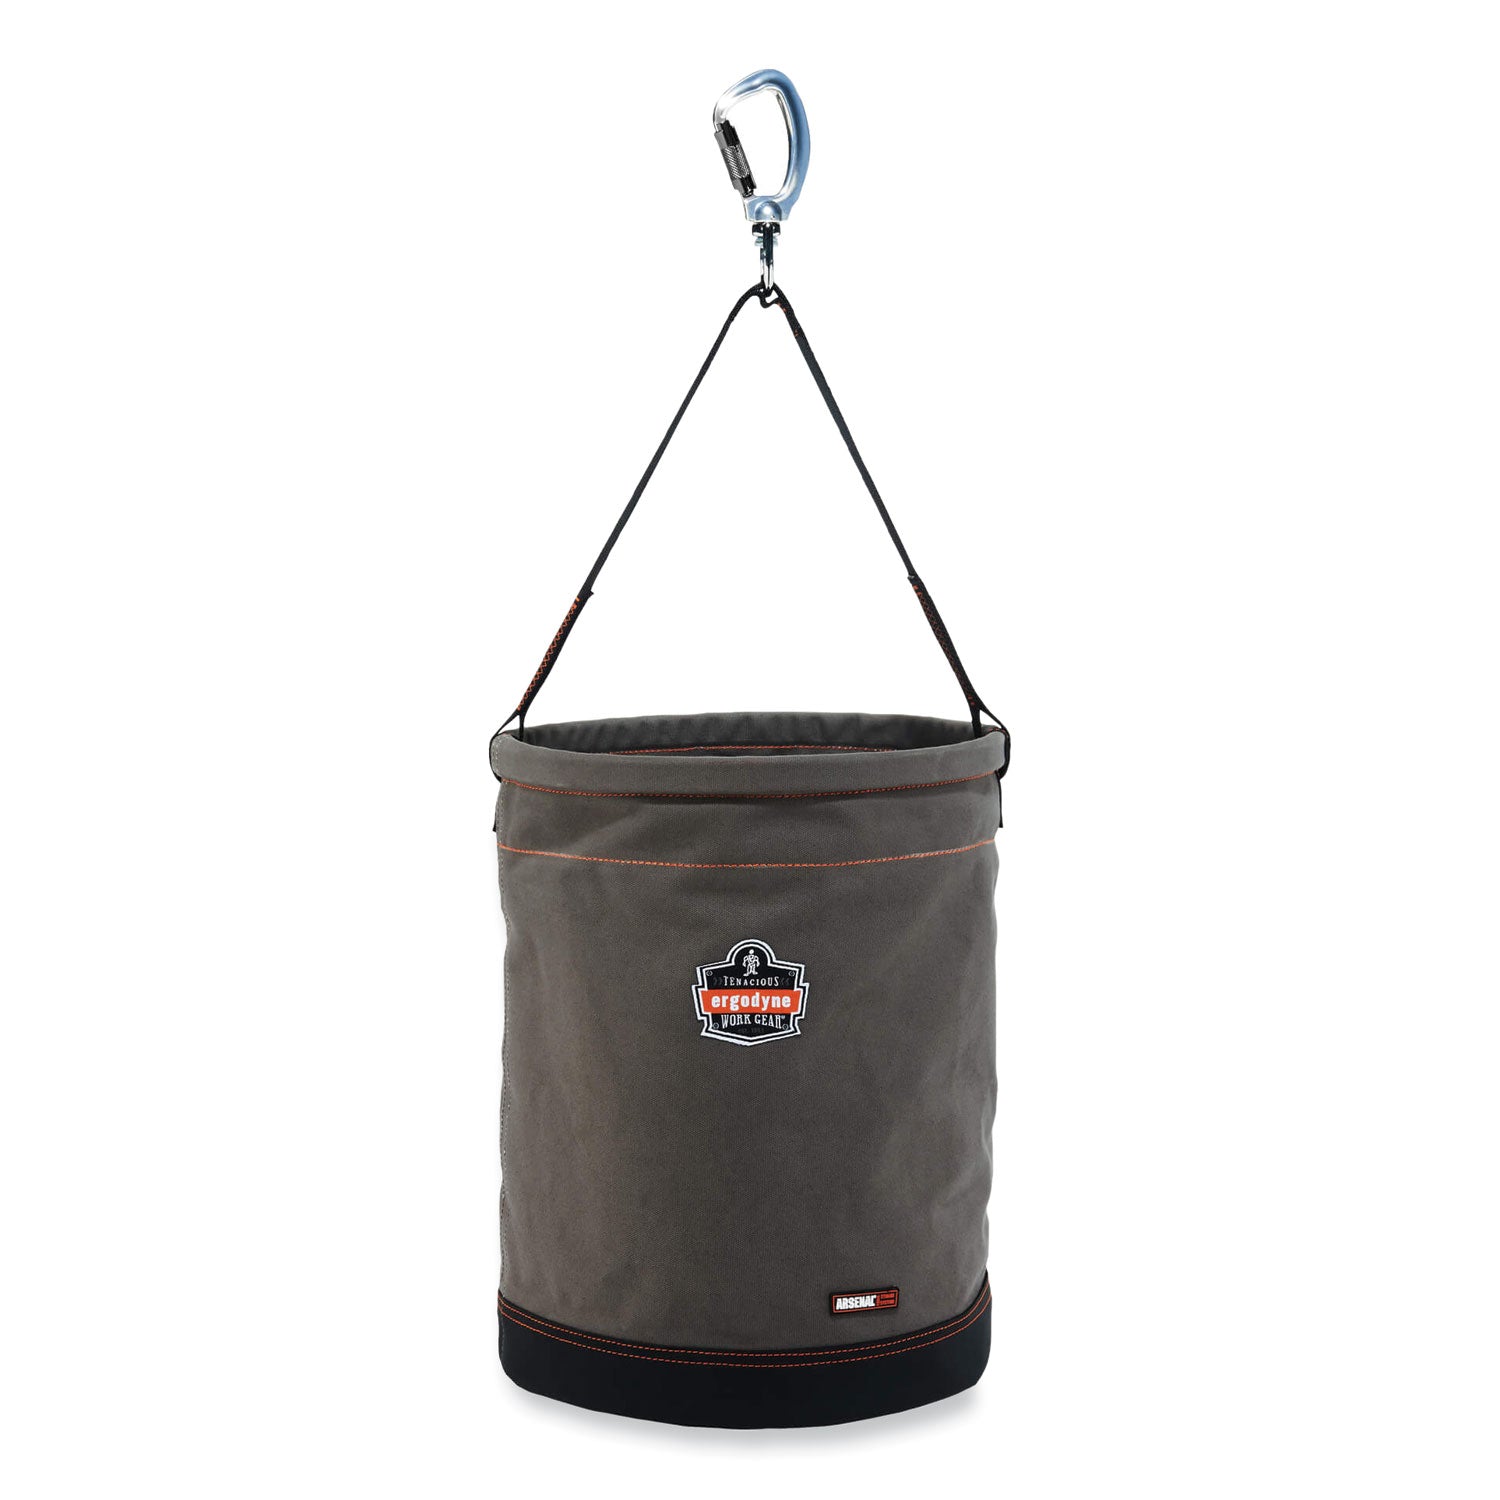 arsenal-5945-extra-large-swiveling-carabiner-canvas-hoist-bucket-150-lb-gray-ships-in-1-3-business-days_ego14945 - 1